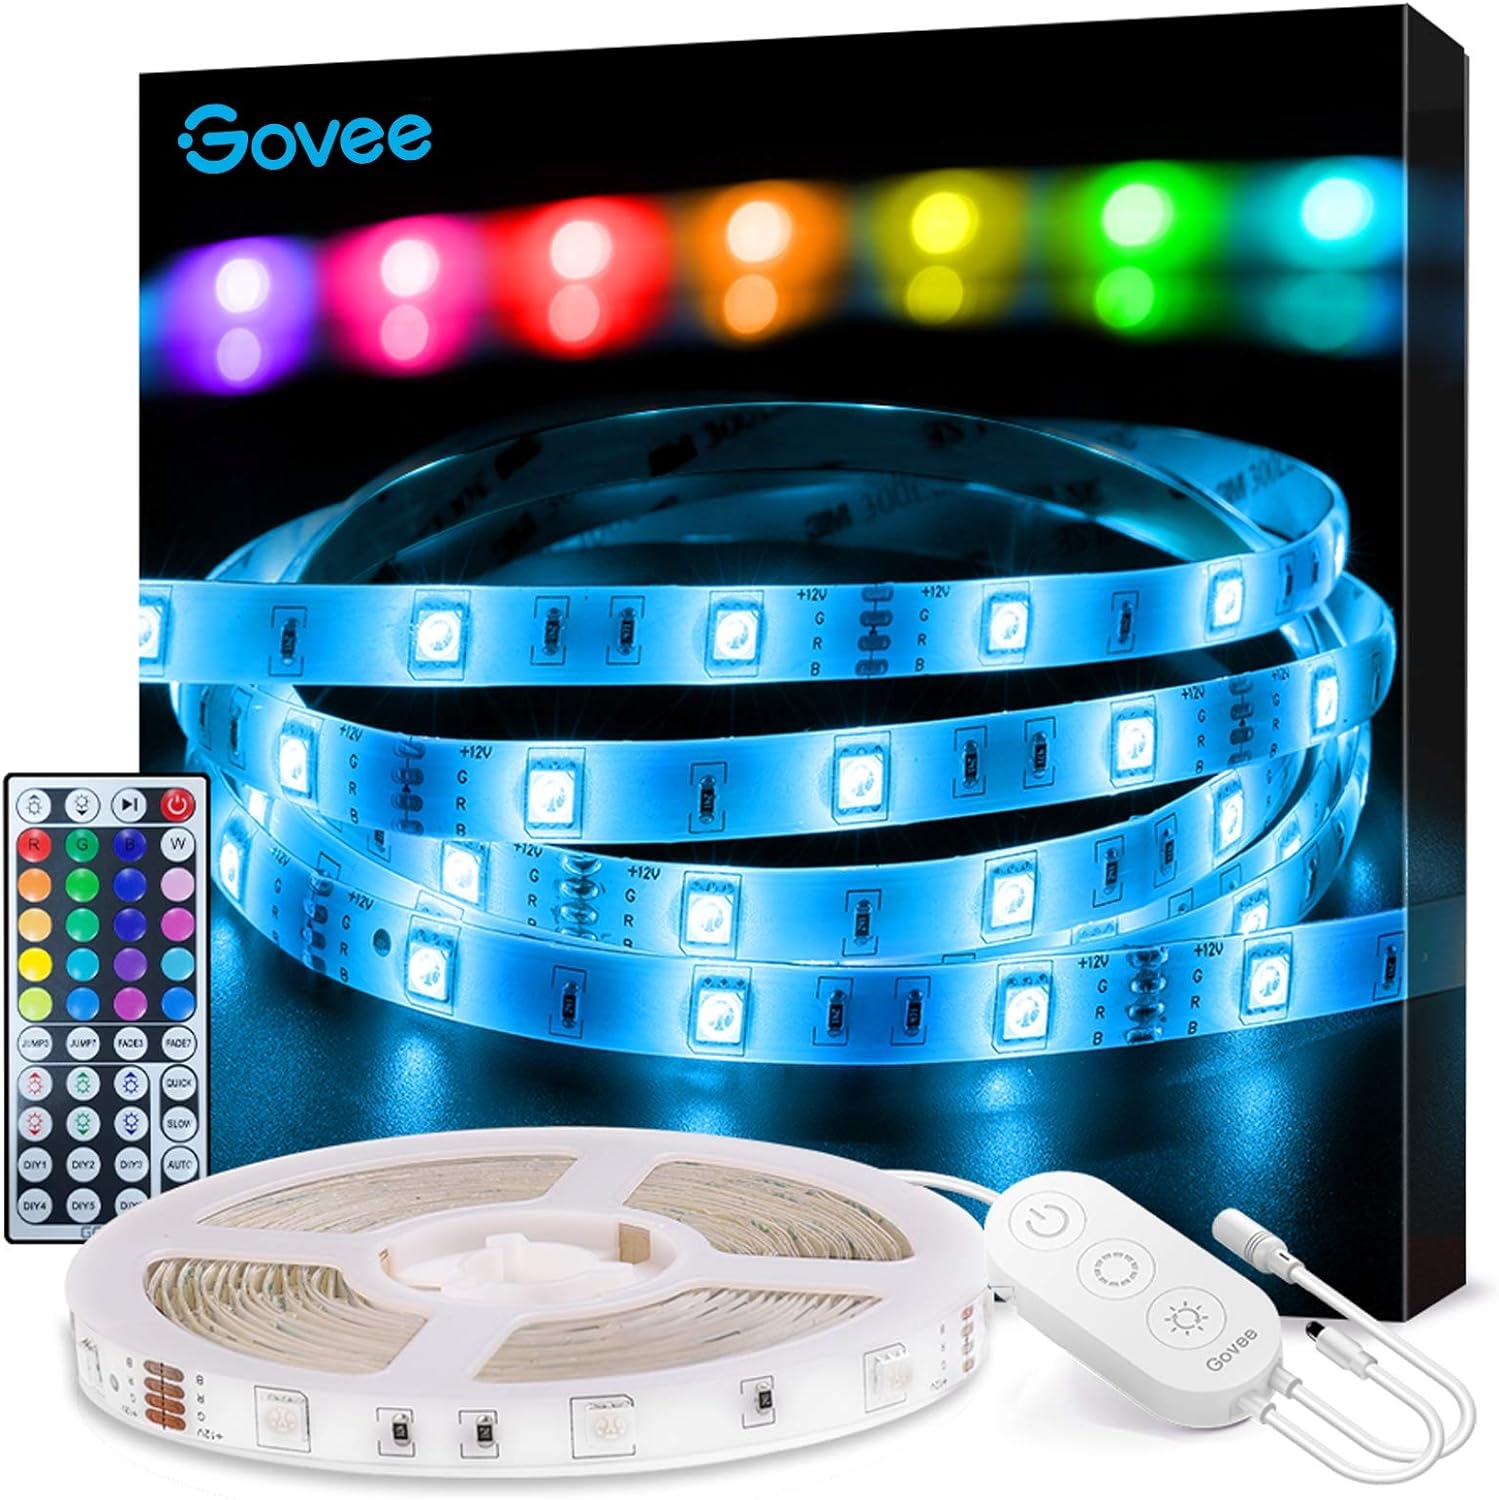 Govee LED Strip Lights, 16.4FT RGB LED Lights with Remote Control, 20 Colors and DIY Mode Color Changing LED Lights, Easy Installation Light Strip for Bedroom, Ceiling, Kitchen